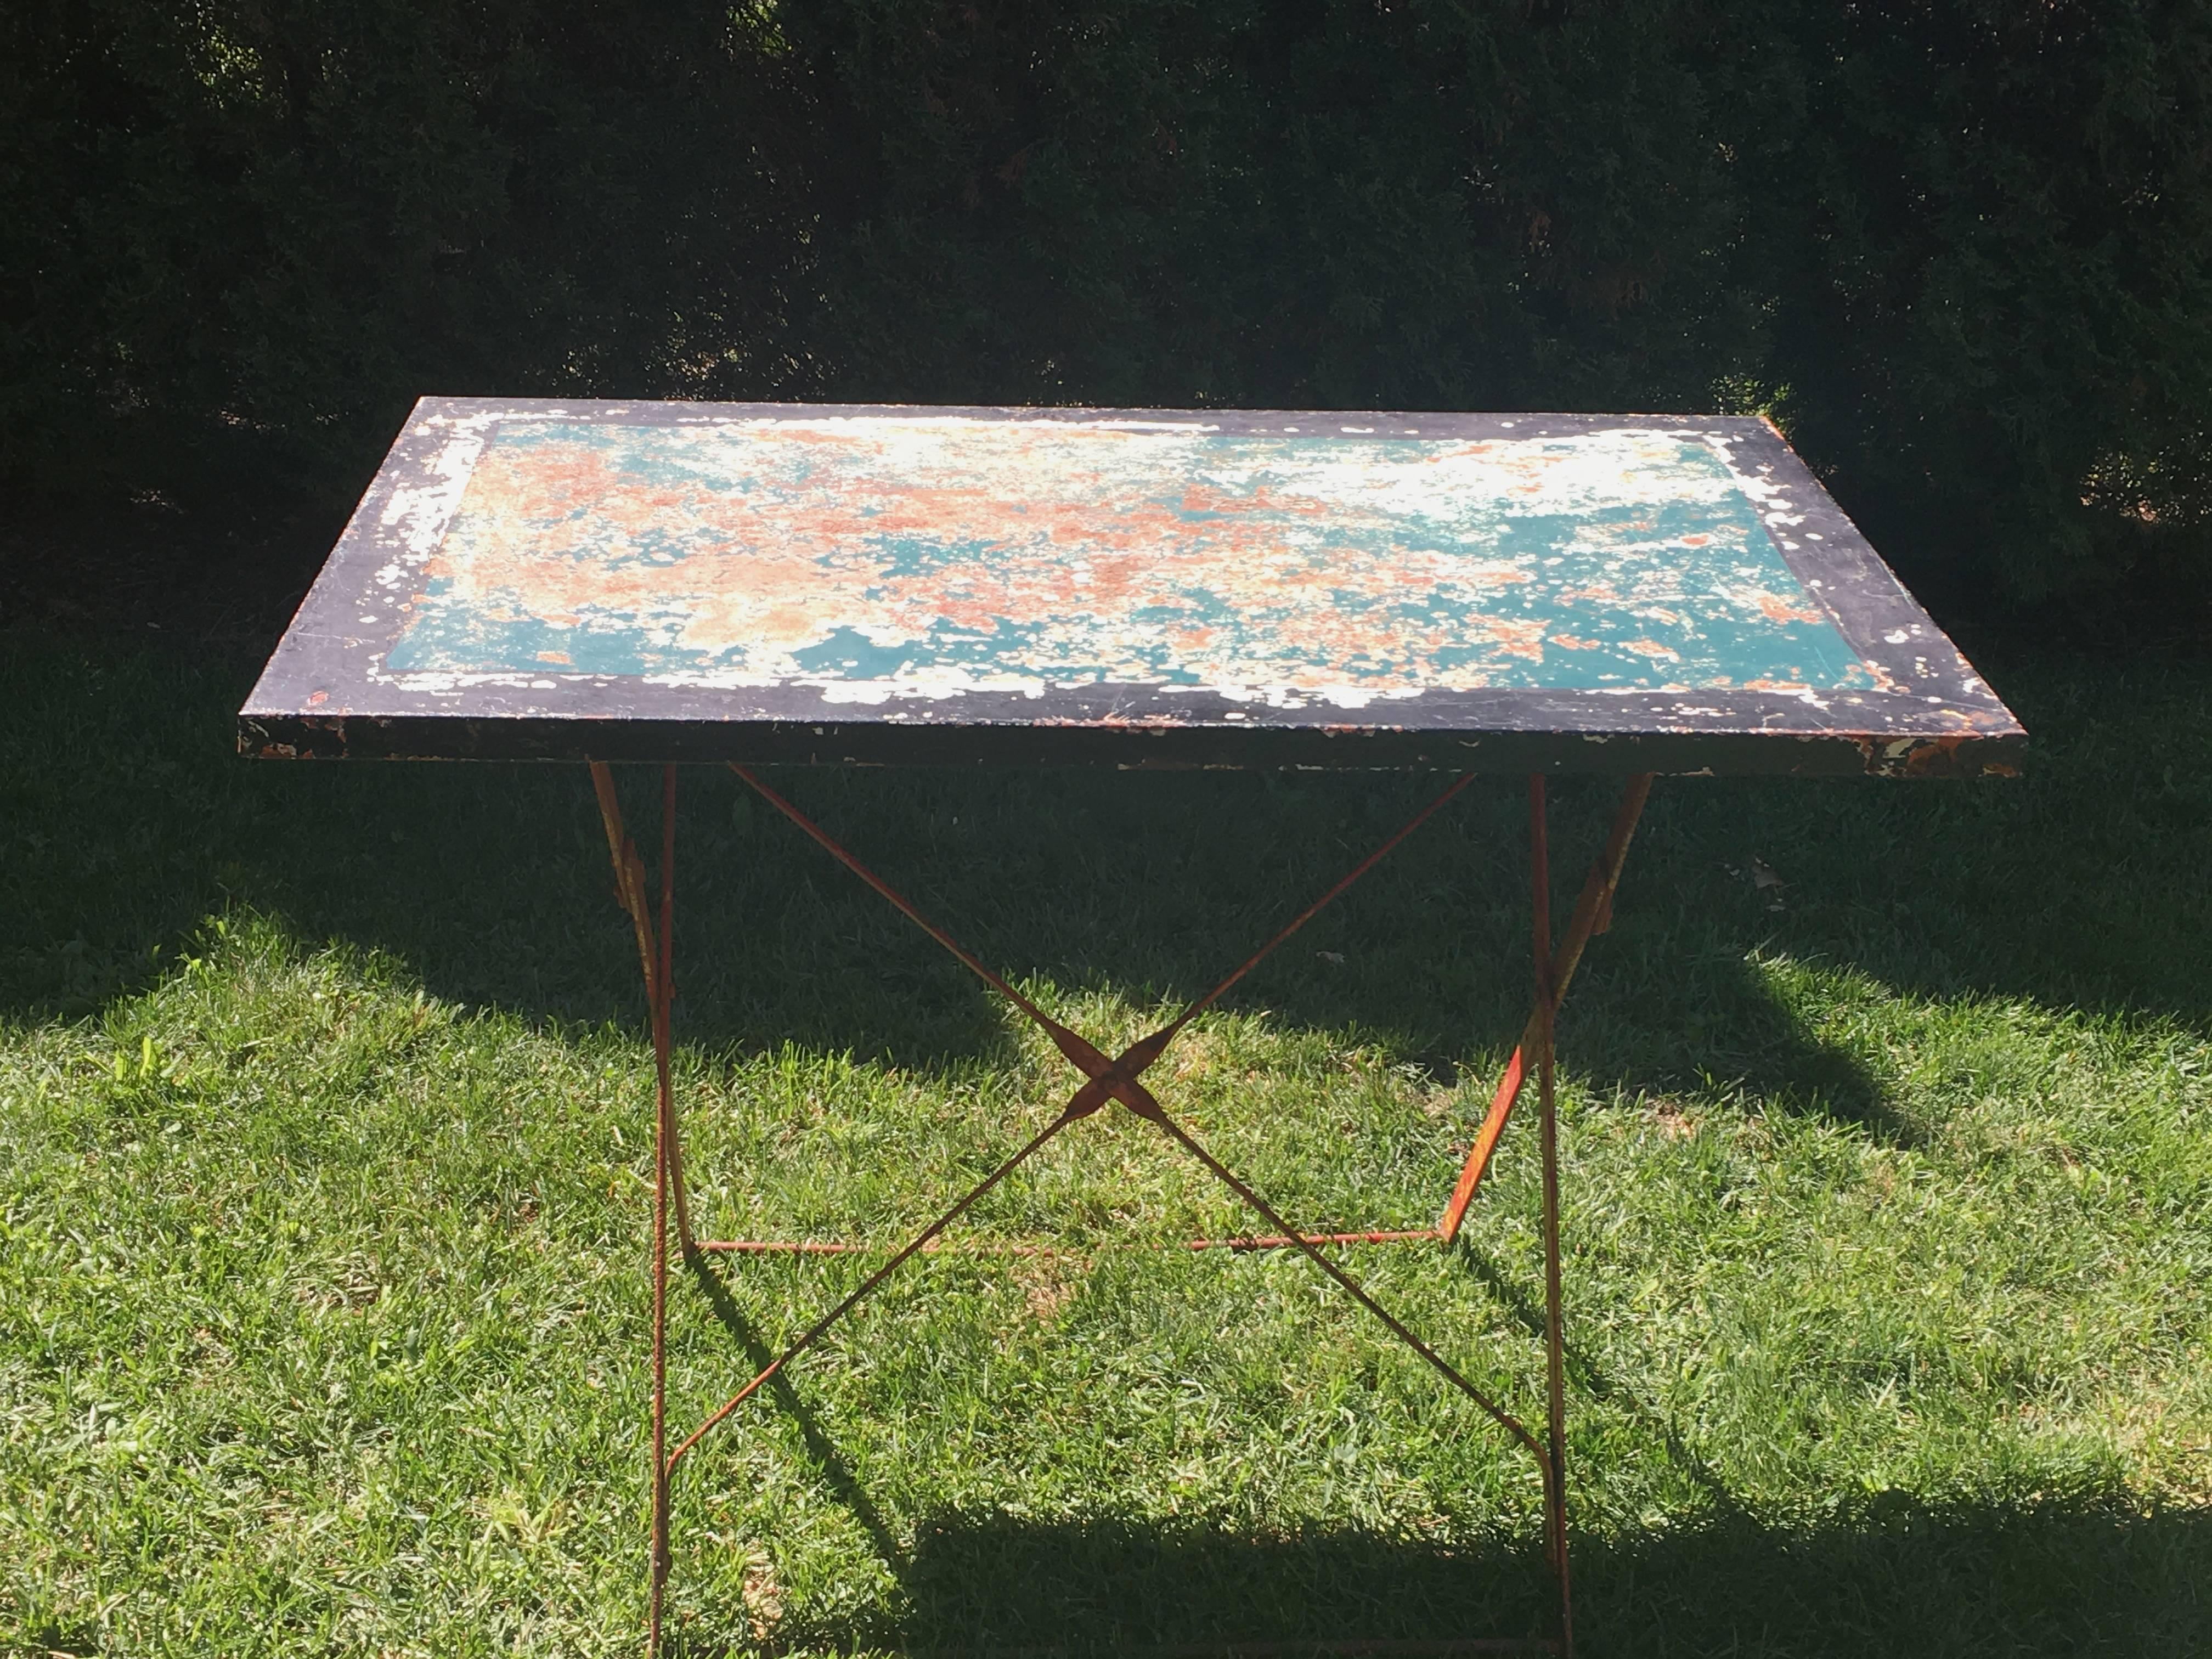 We love this versatile folding garden table for its crazy and brightly-painted original surface and easy folding mechanism. It would make a great side or serving table in your sunroom, on a porch, or in the garden for a lunch table for four. France,